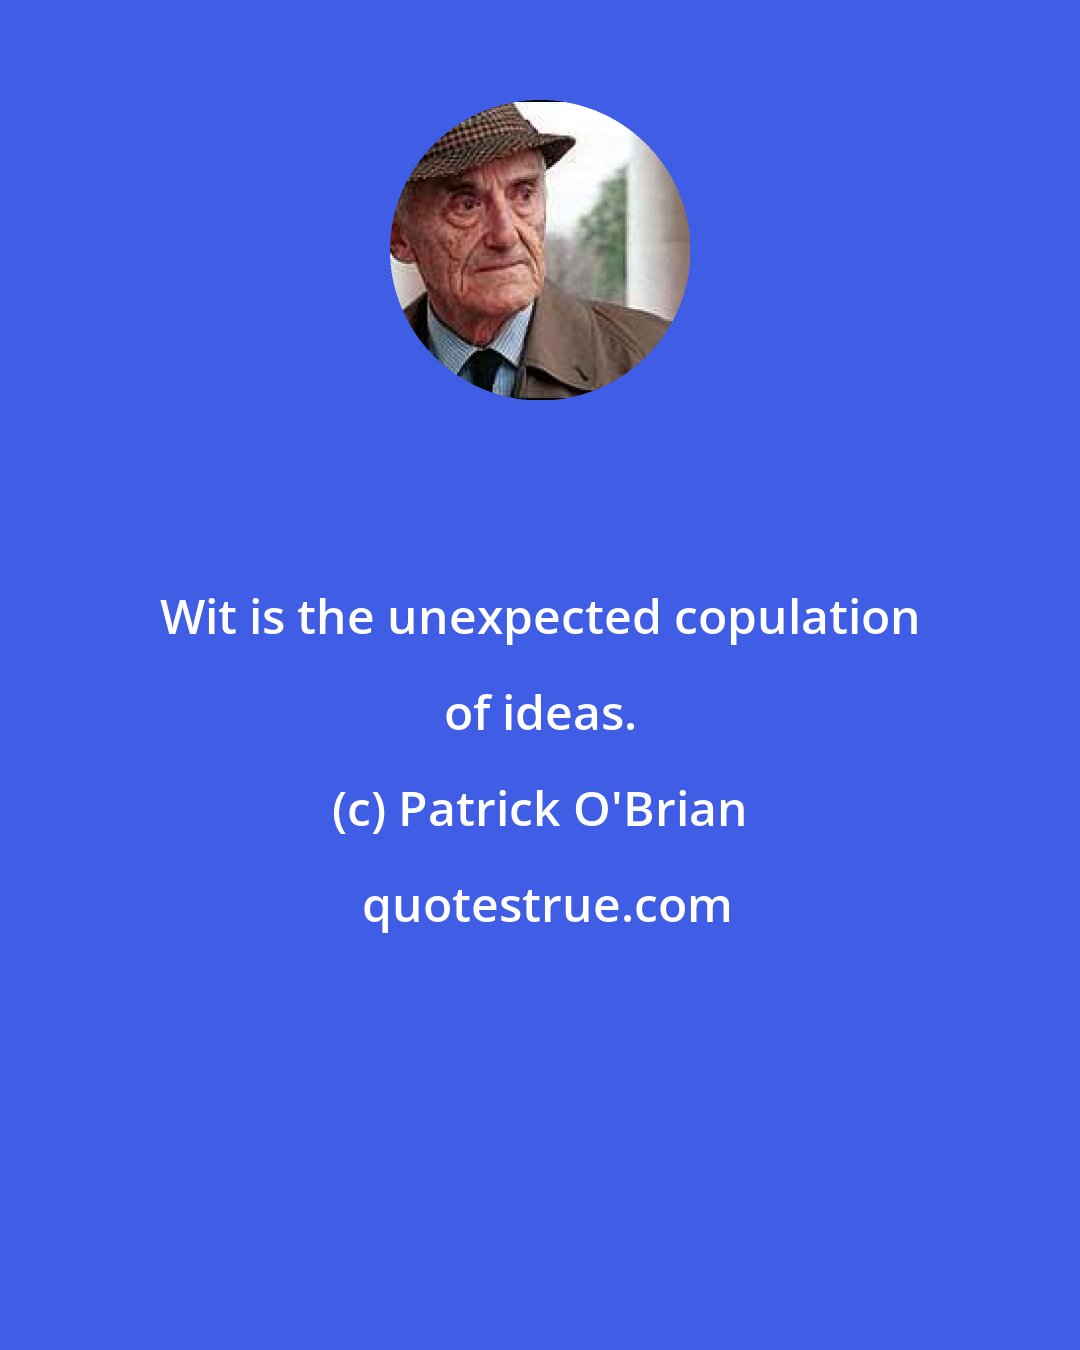 Patrick O'Brian: Wit is the unexpected copulation of ideas.